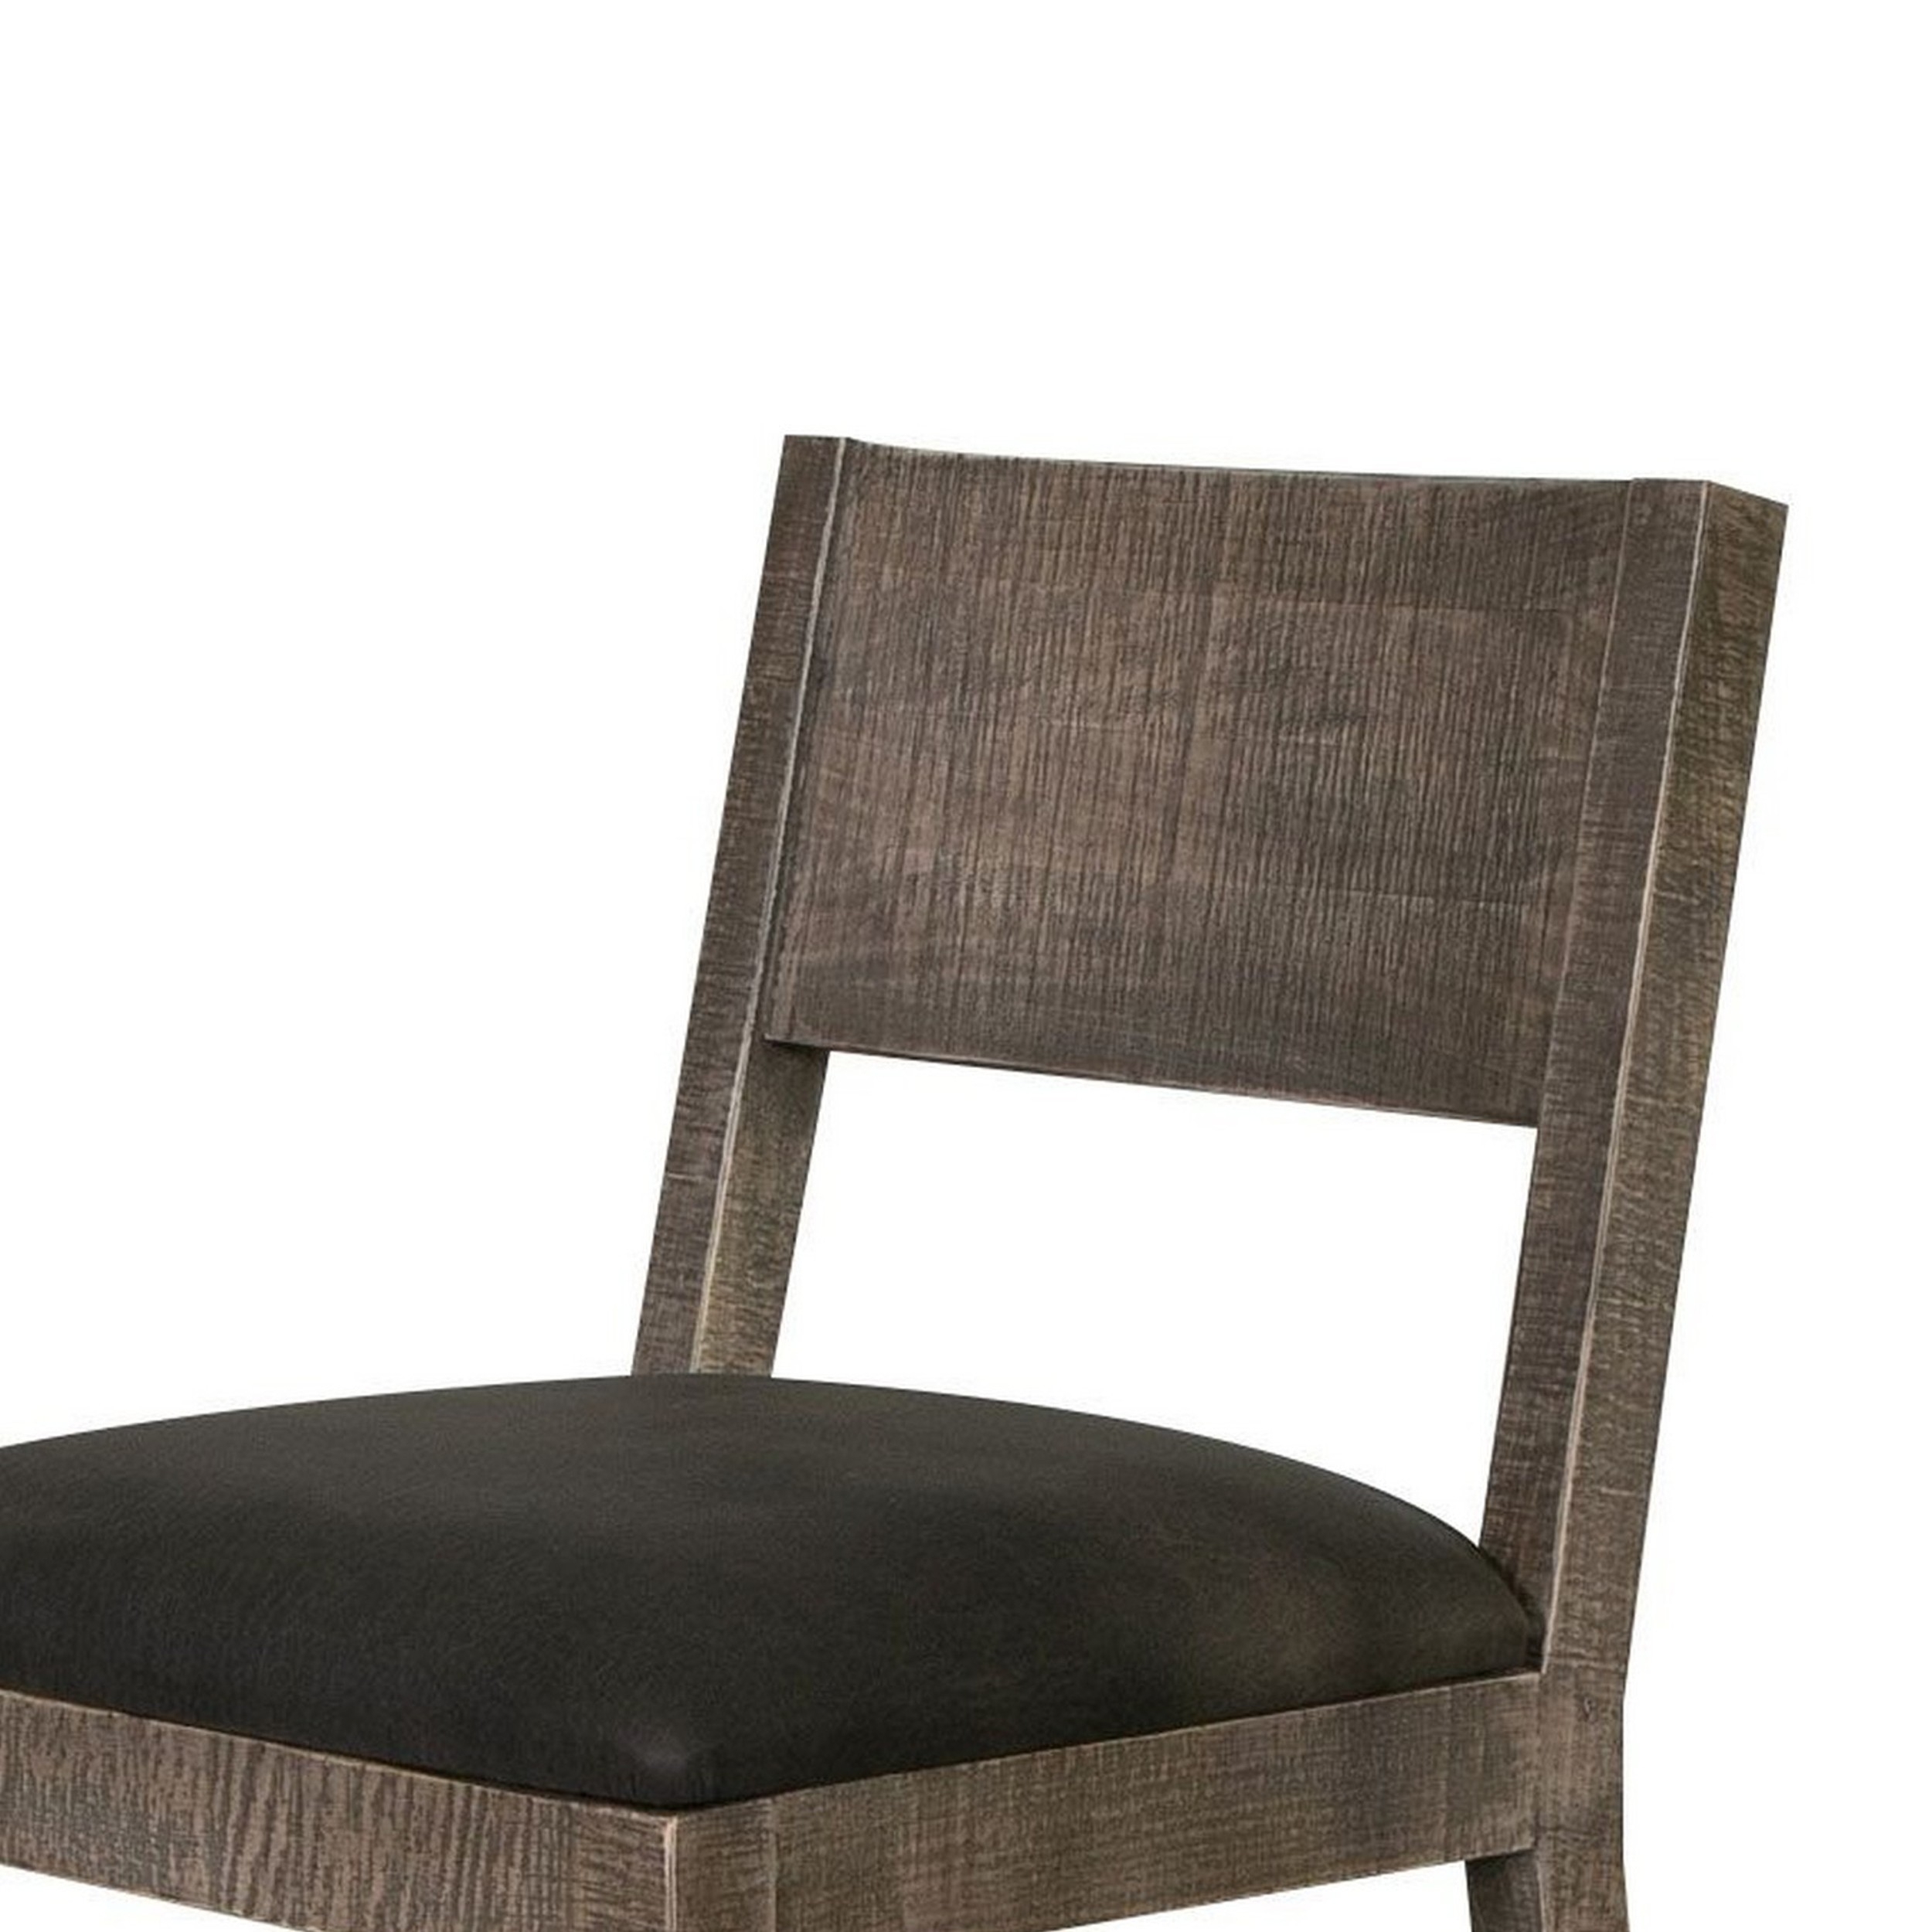 Piel 21 Inch Dining Chair Set Of 2, Brown Pine Wood, Black Faux Leather - Saltoro Sherpi